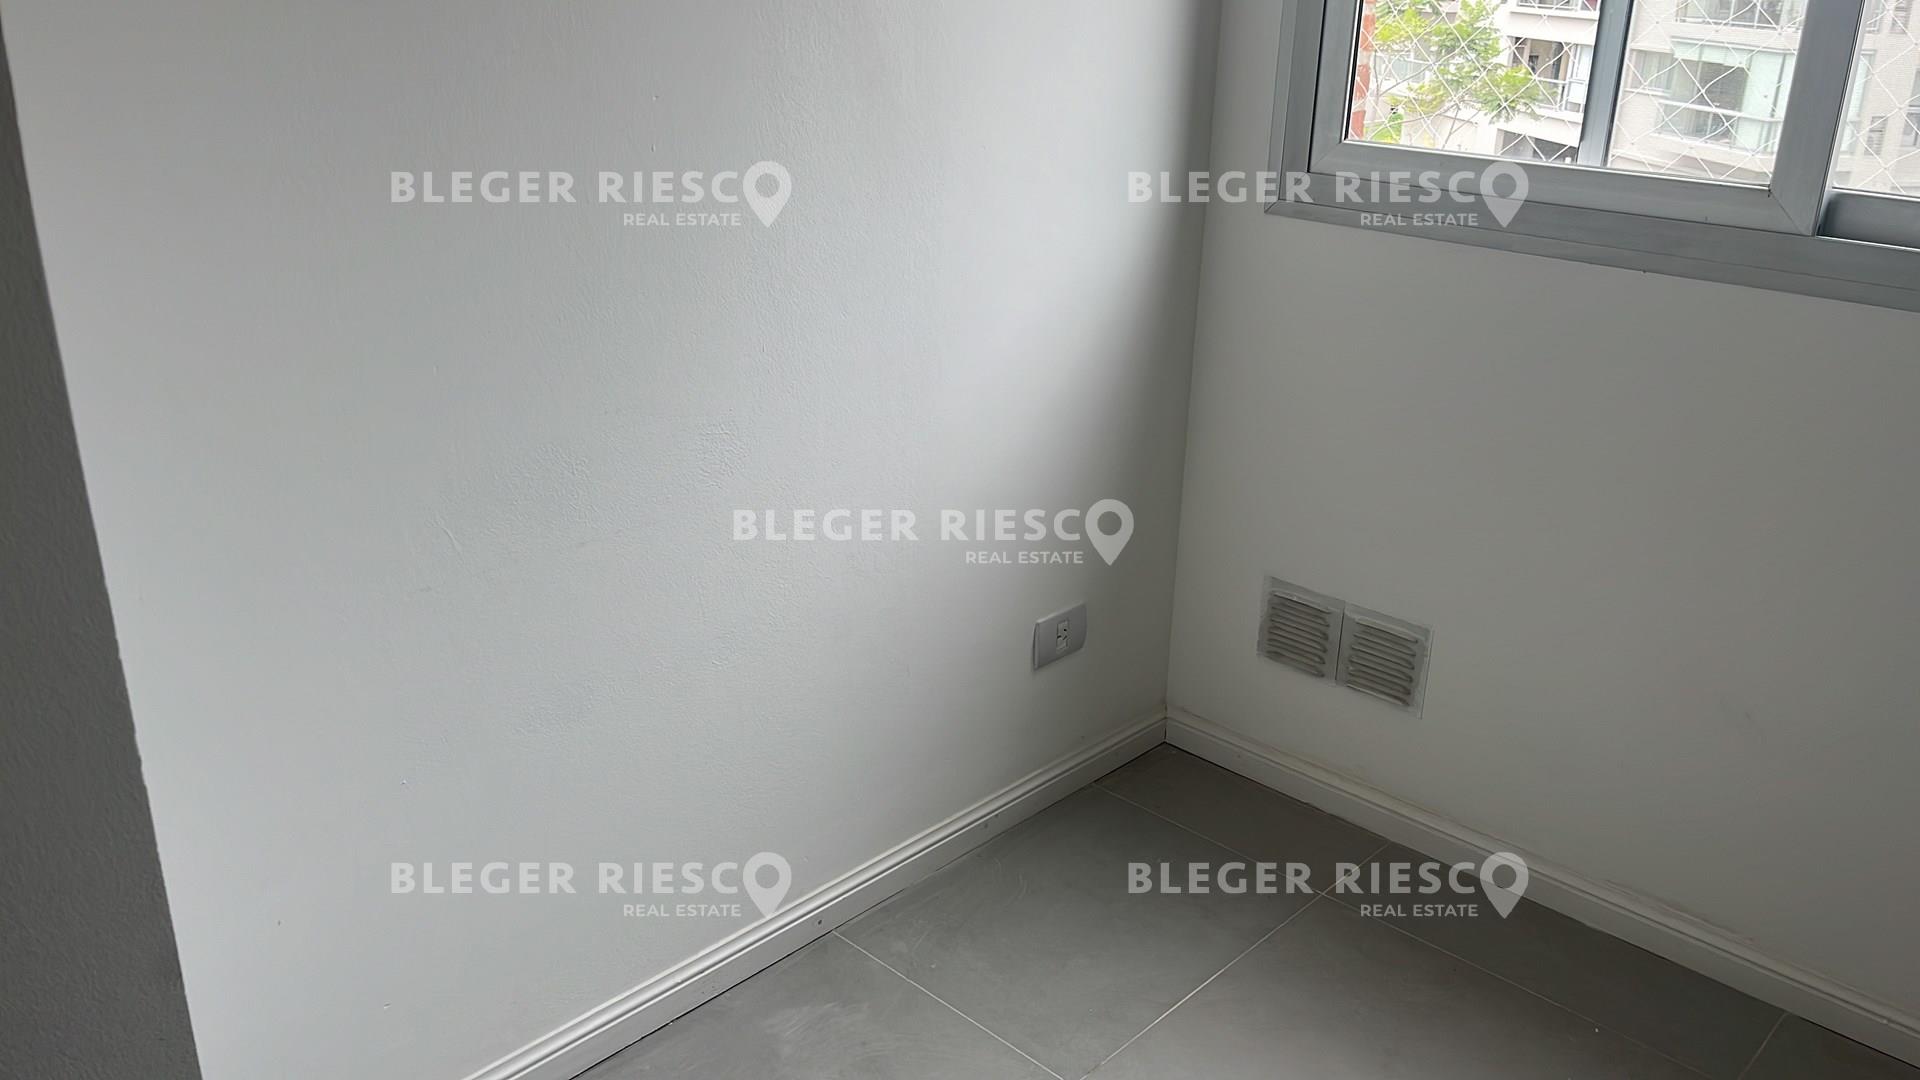 #5071518 | Rental | Apartment | Portezuelo (Bleger-Riesco Real State)